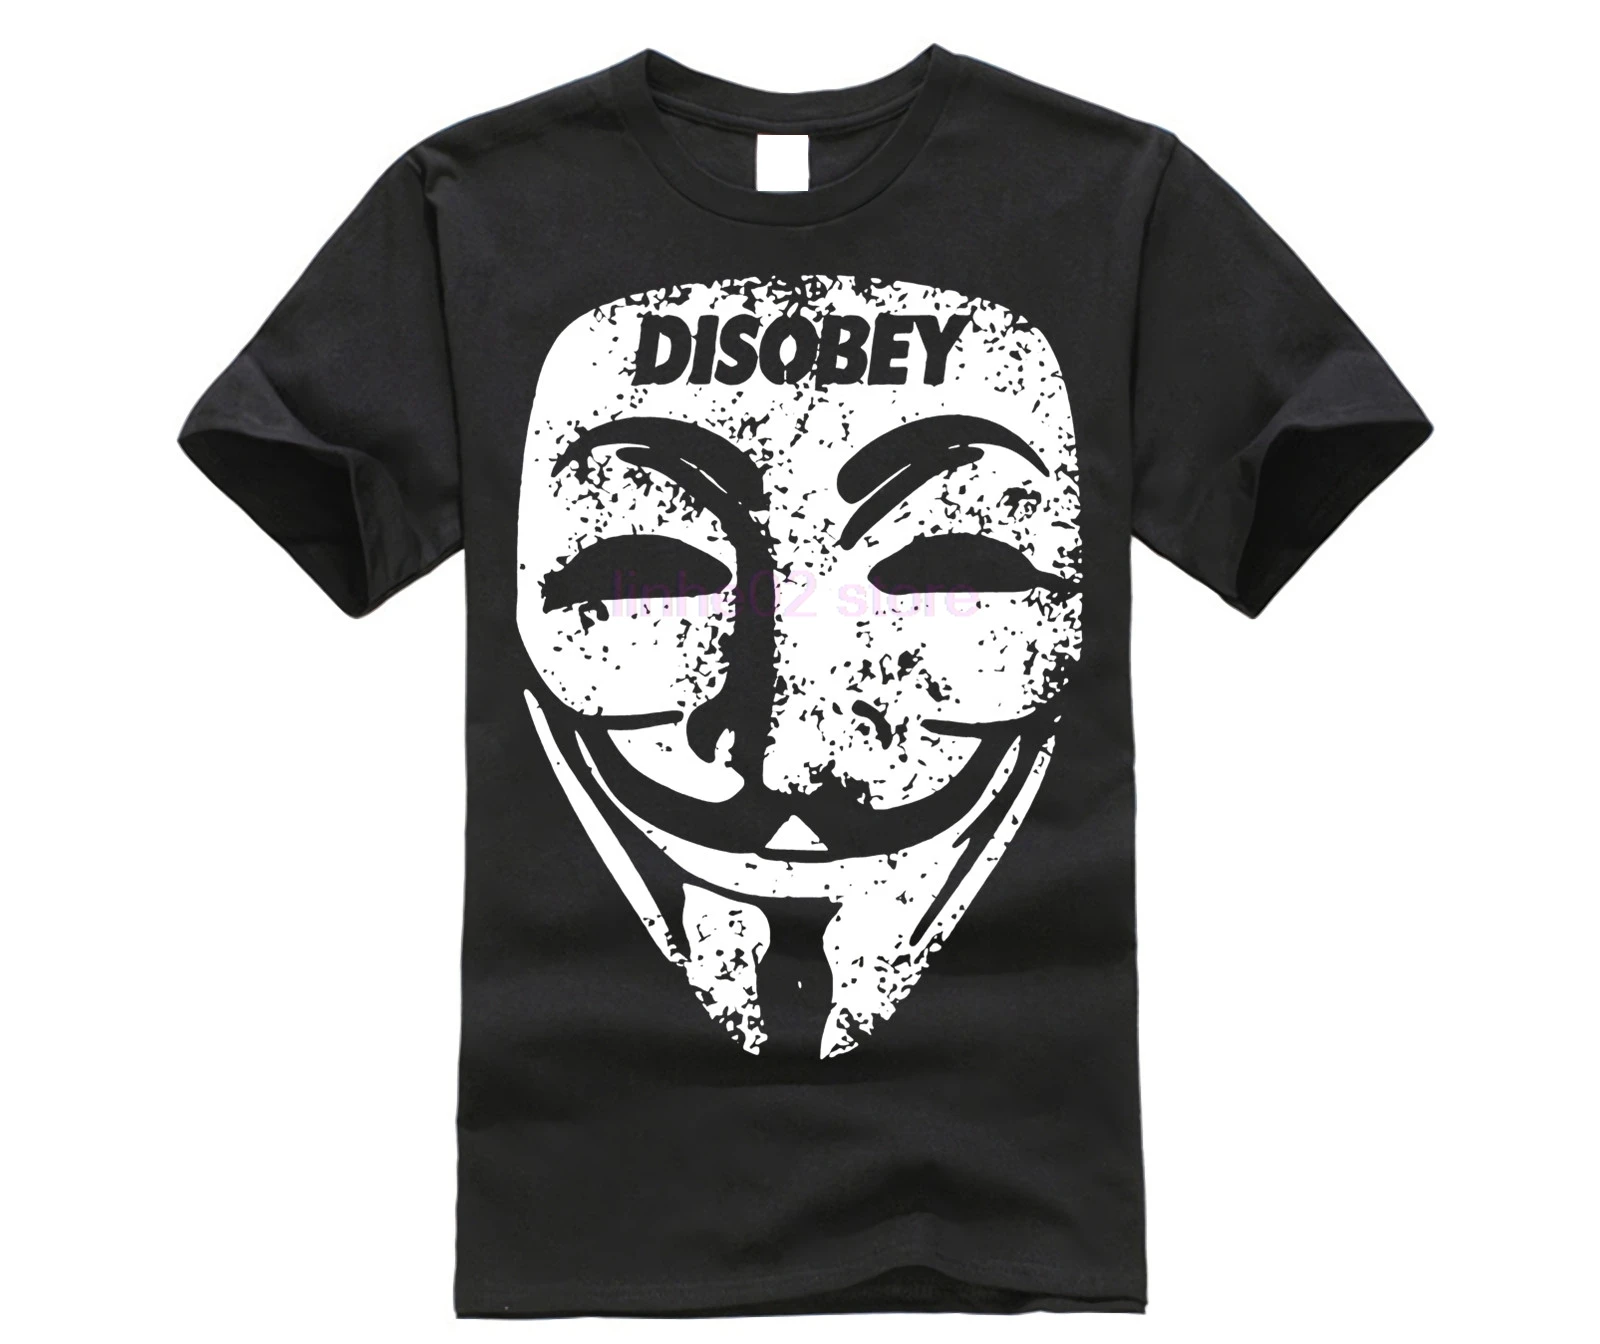 

Guy Fawkes Mask T Shirt Anonymous Disobey Troll Political V For Computer Vendetta Binary Code Anarchy Hacker Tee